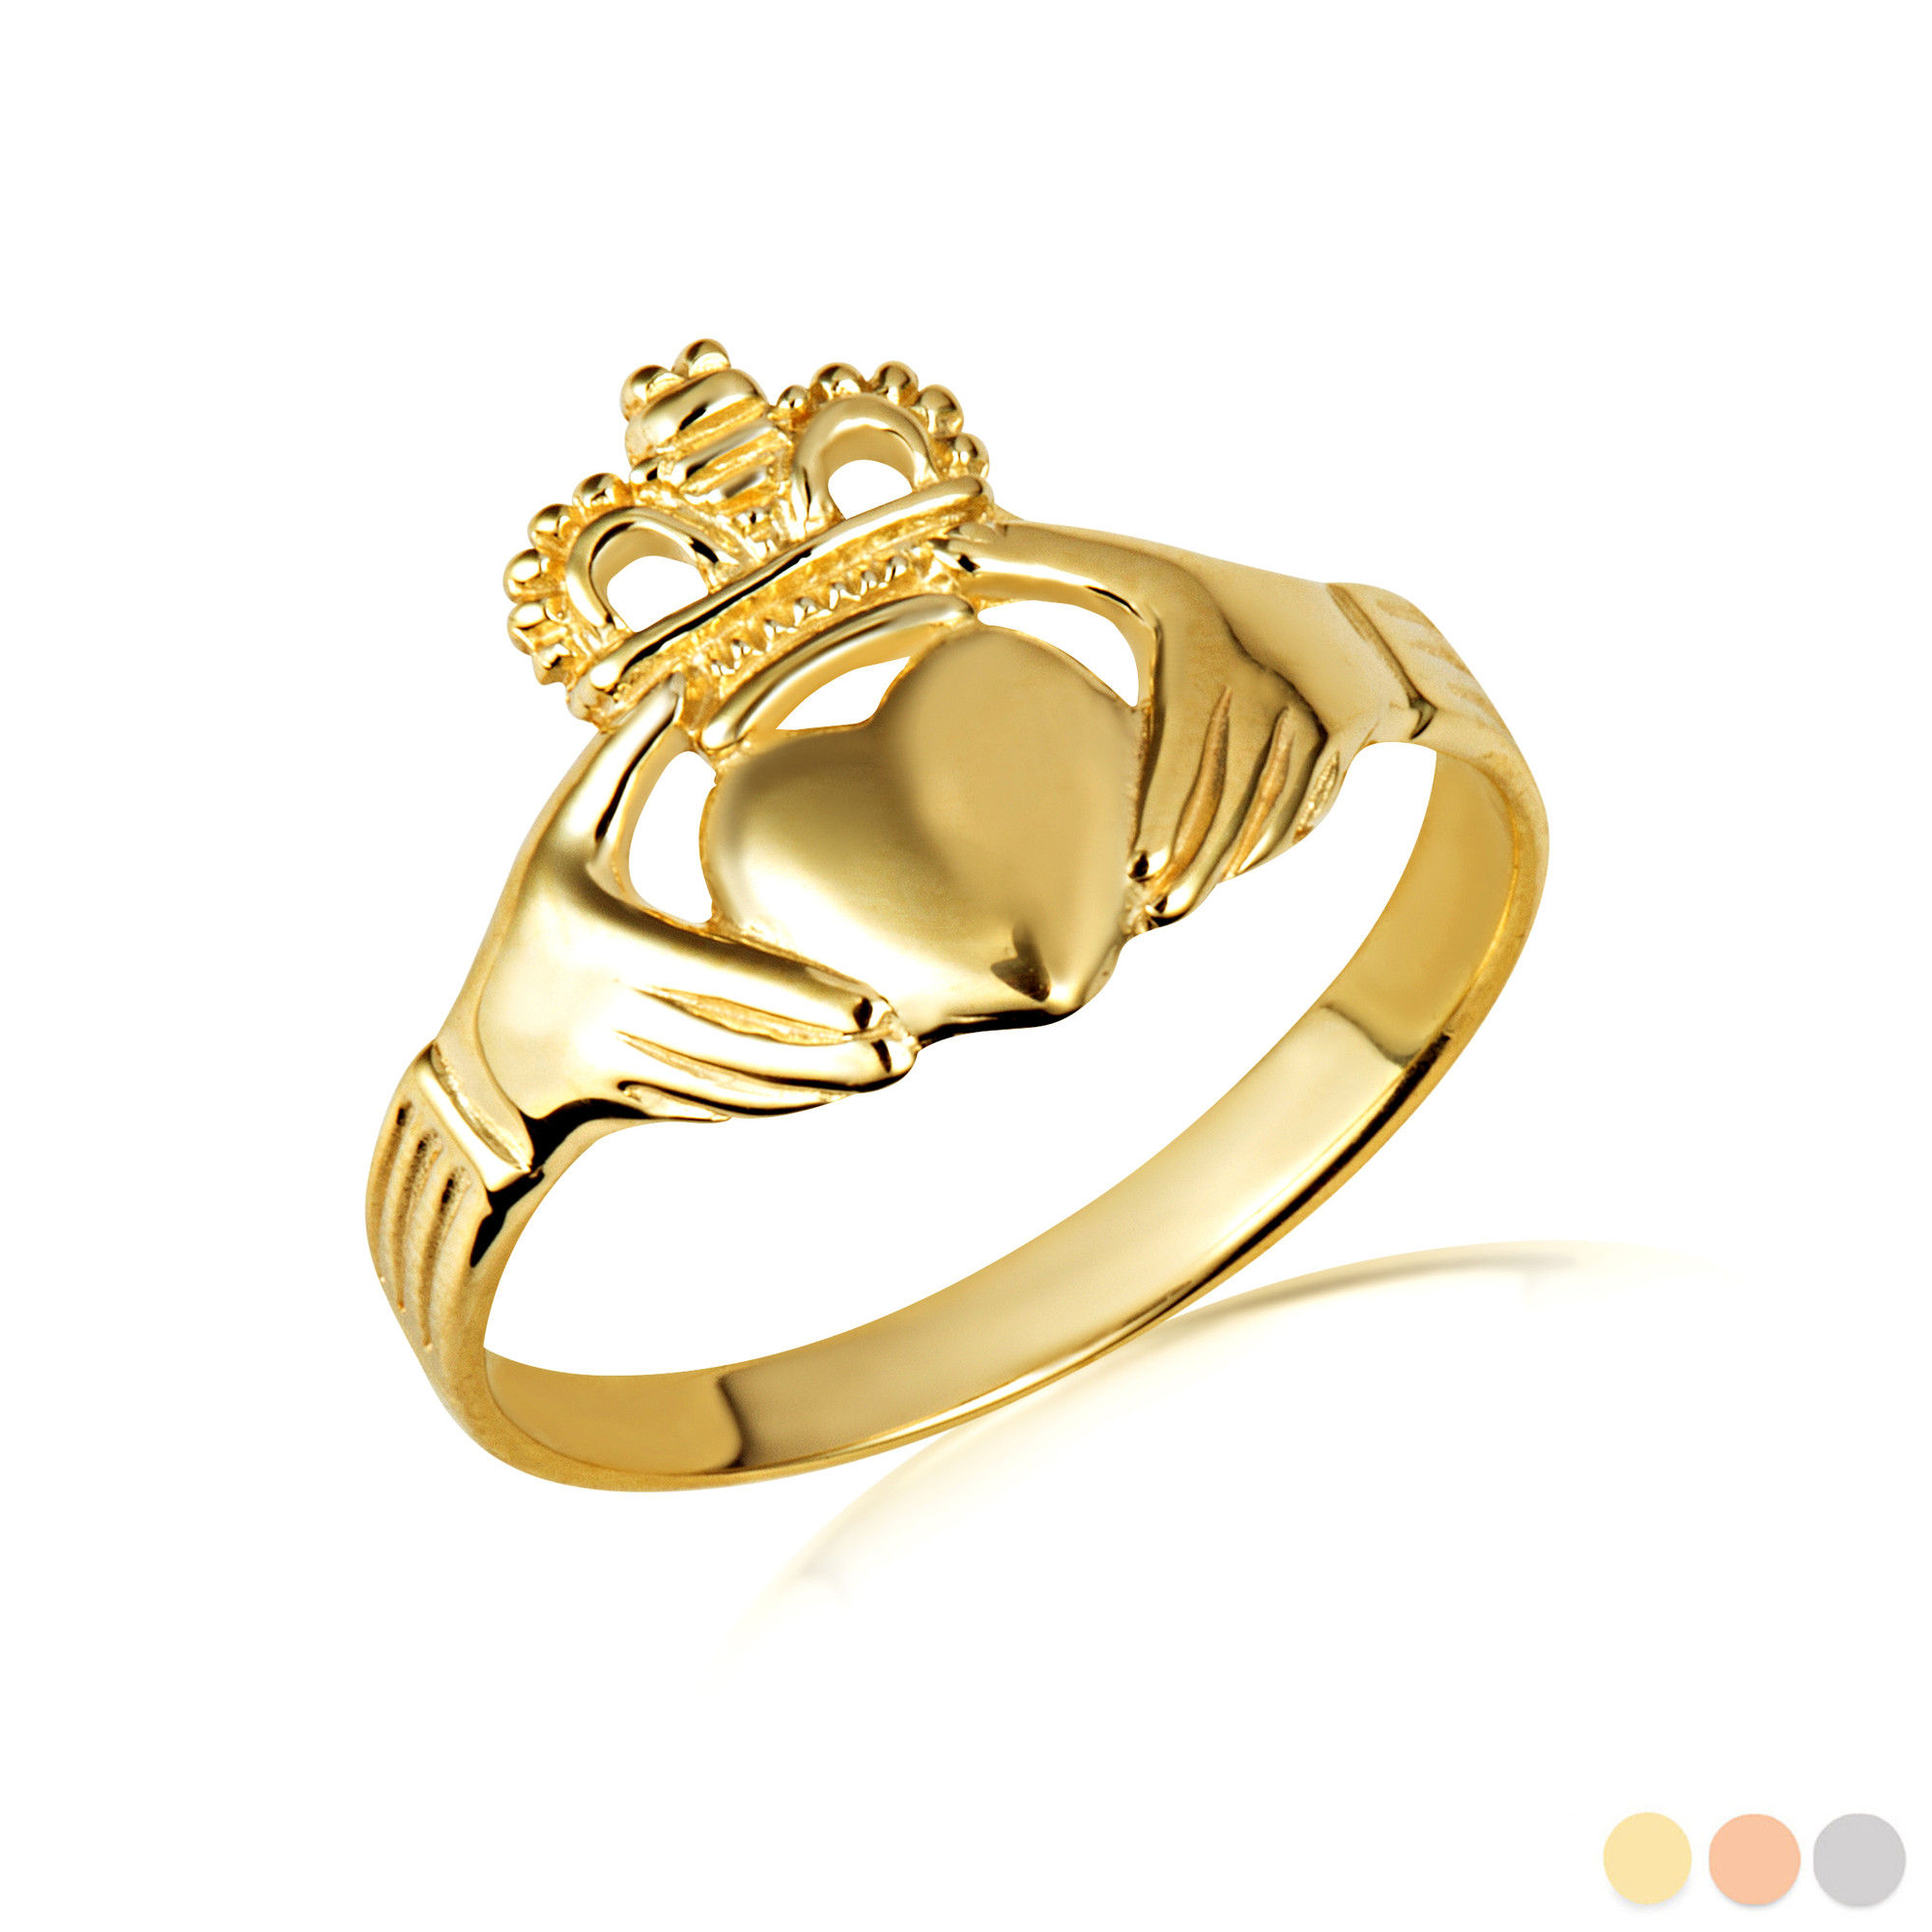 Gold Woman's Classic Claddagh Ring | Factory Direct Jewelry